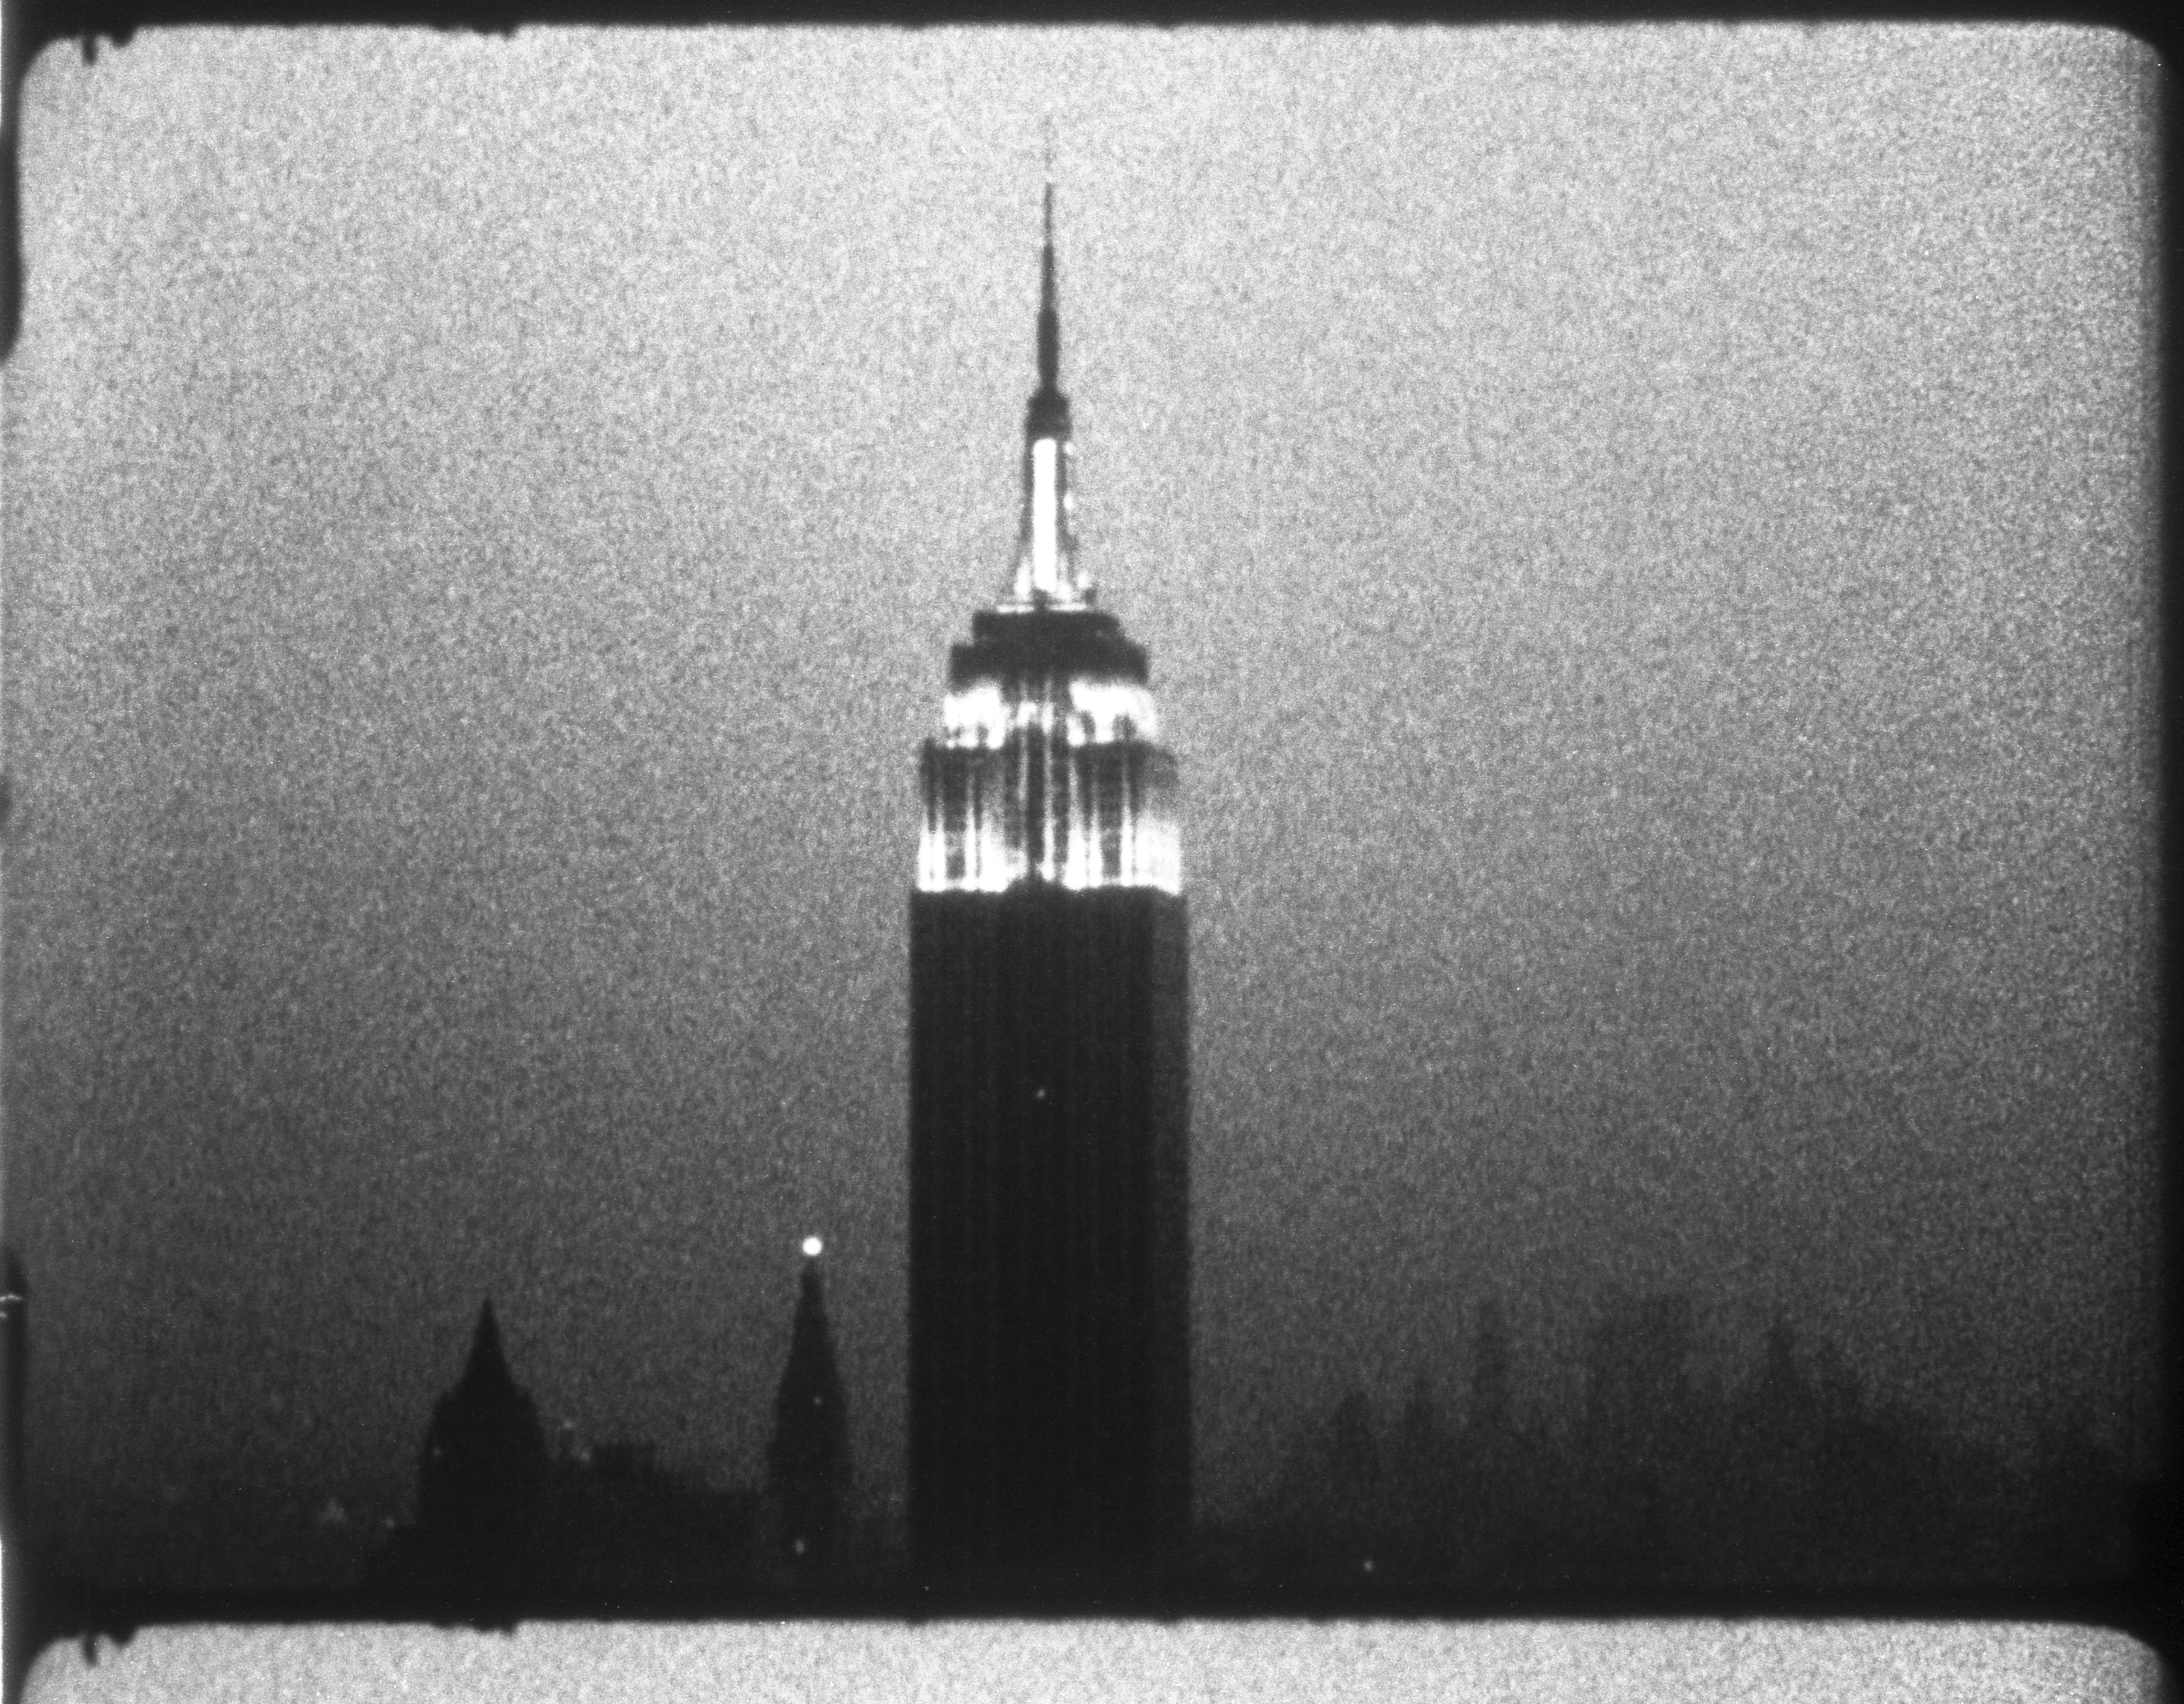 Warhol's Empire, 1964. 16mm, b&w, silent 8 hrs., 5 min. at 16 fps, 7 hrs., 11 min. at 18 fps © 2018 The Andy Warhol Museum, Pittsburgh, PA, a museum of Carnegie Institute.